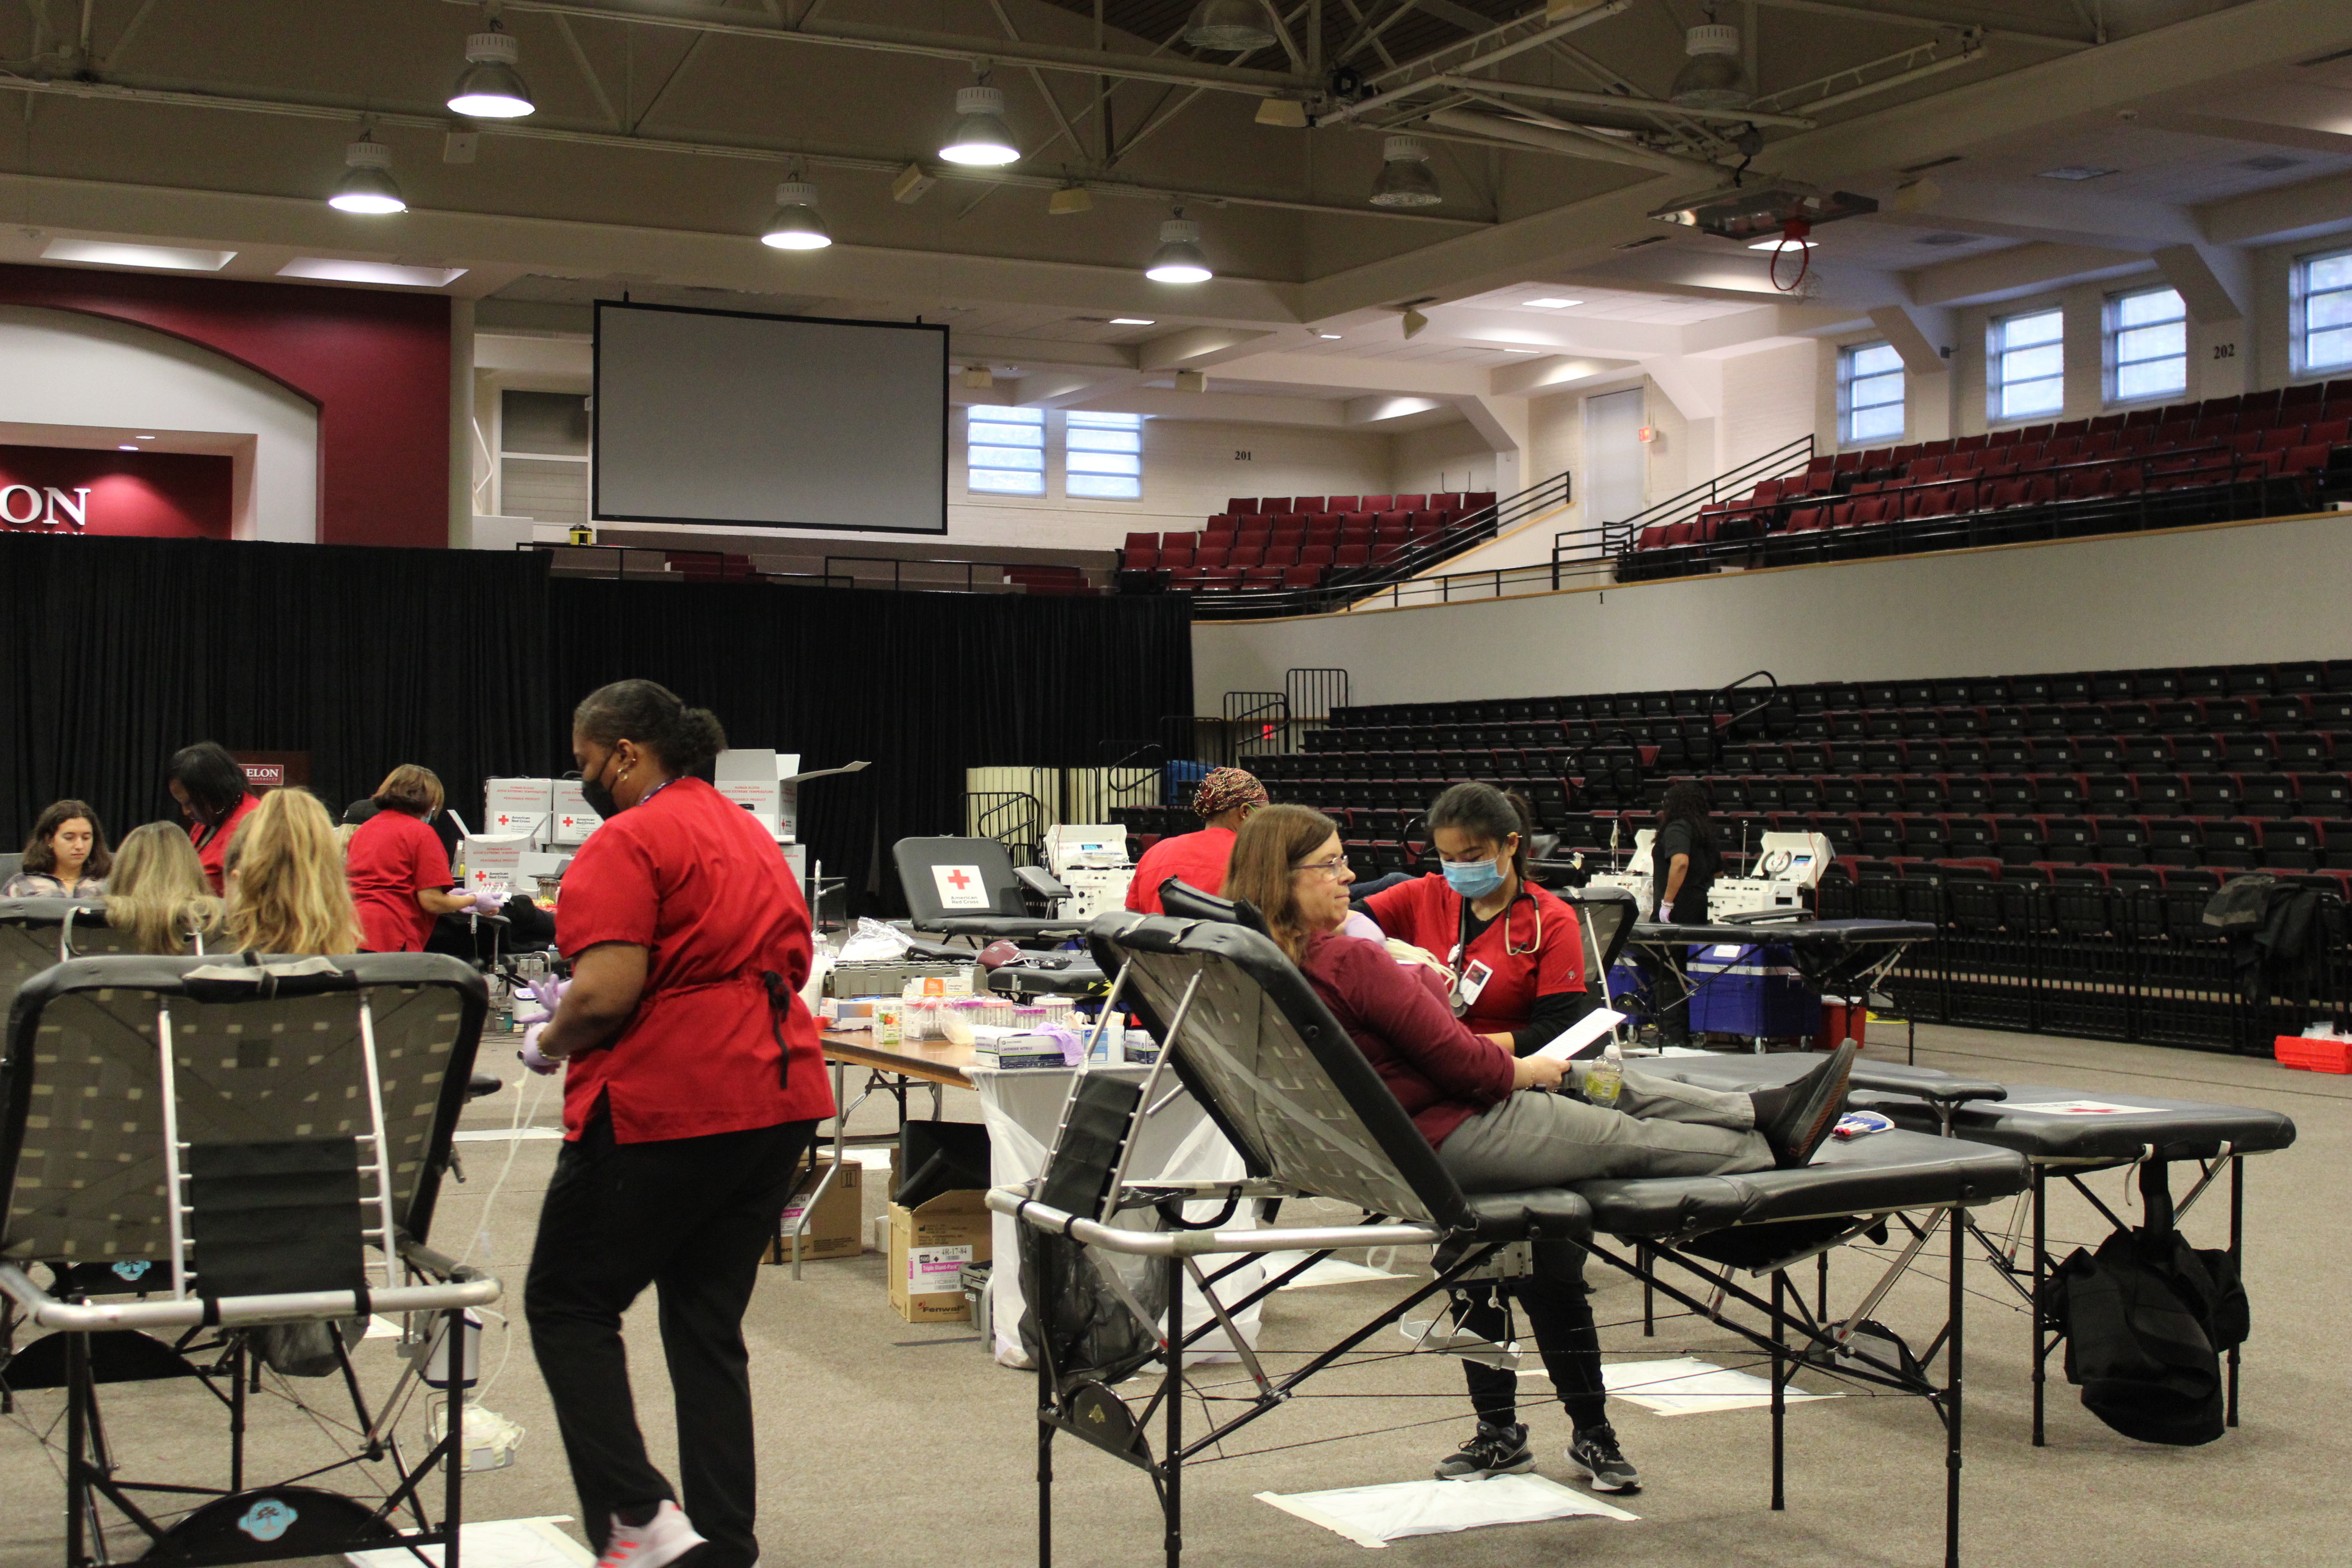 Participating donating blood during the Greek and Service Week blood drive in partnership with the Red Cross